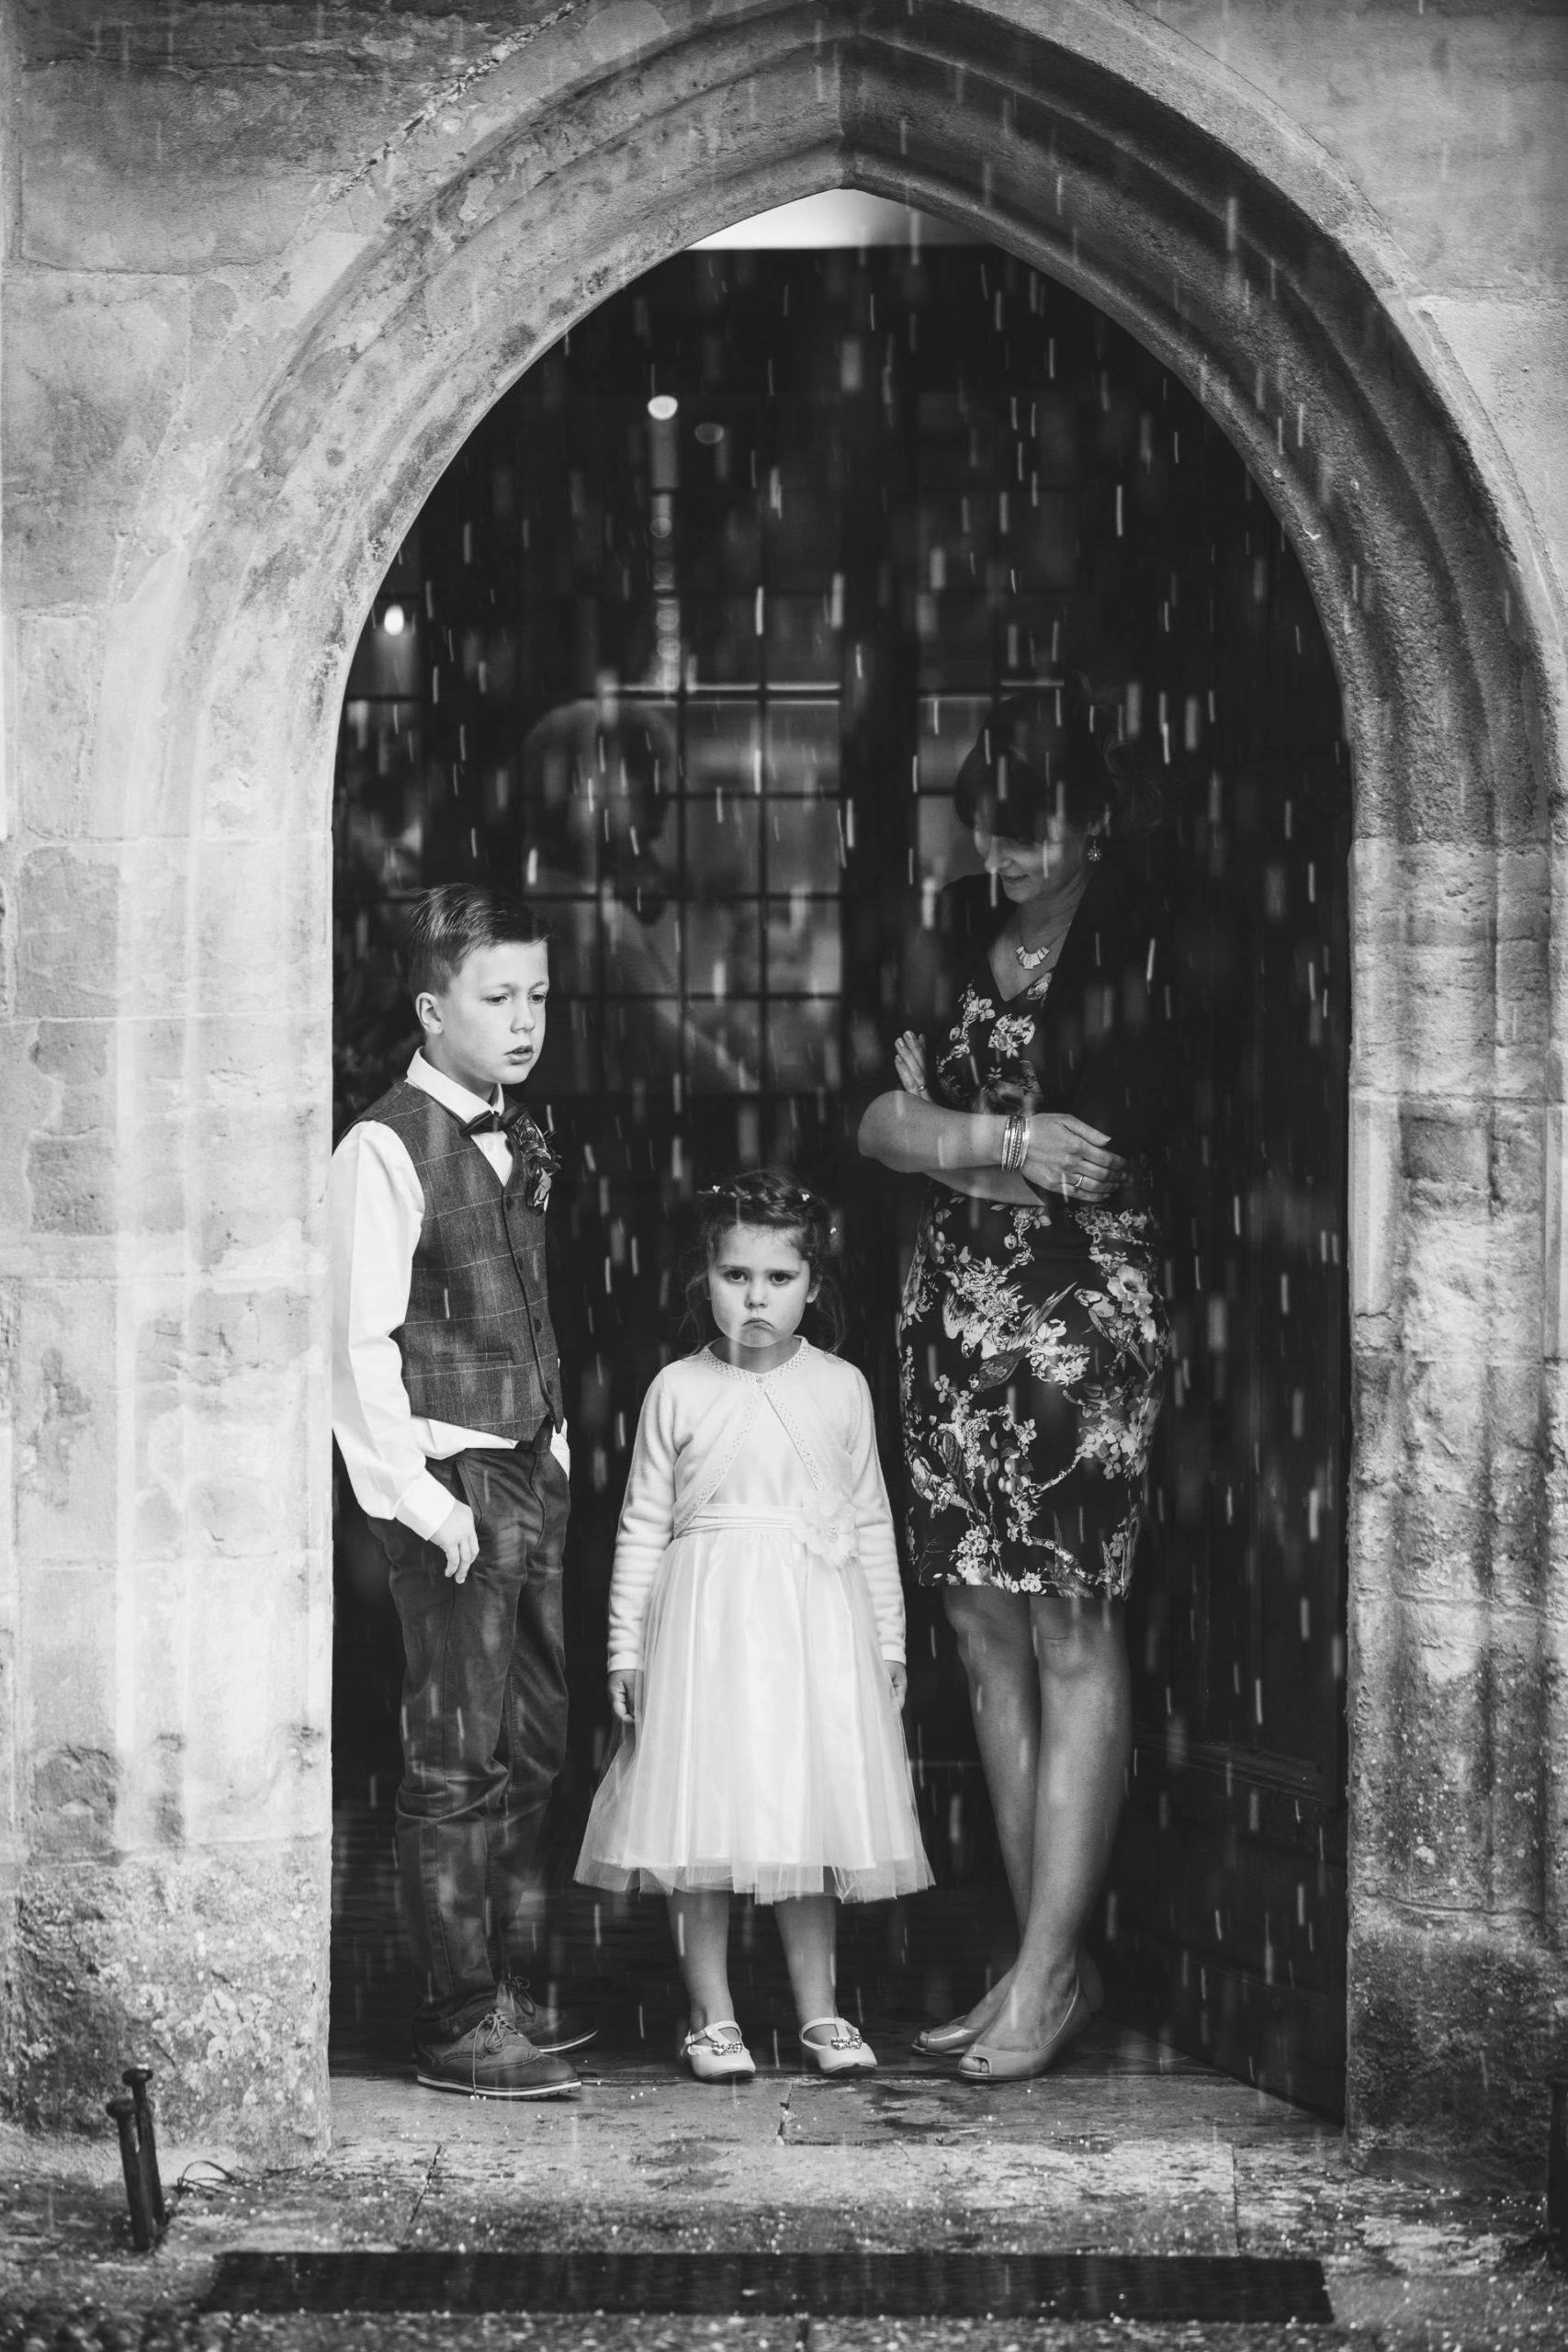 A flower girl frowning at the rain on a wet weather wedding day.